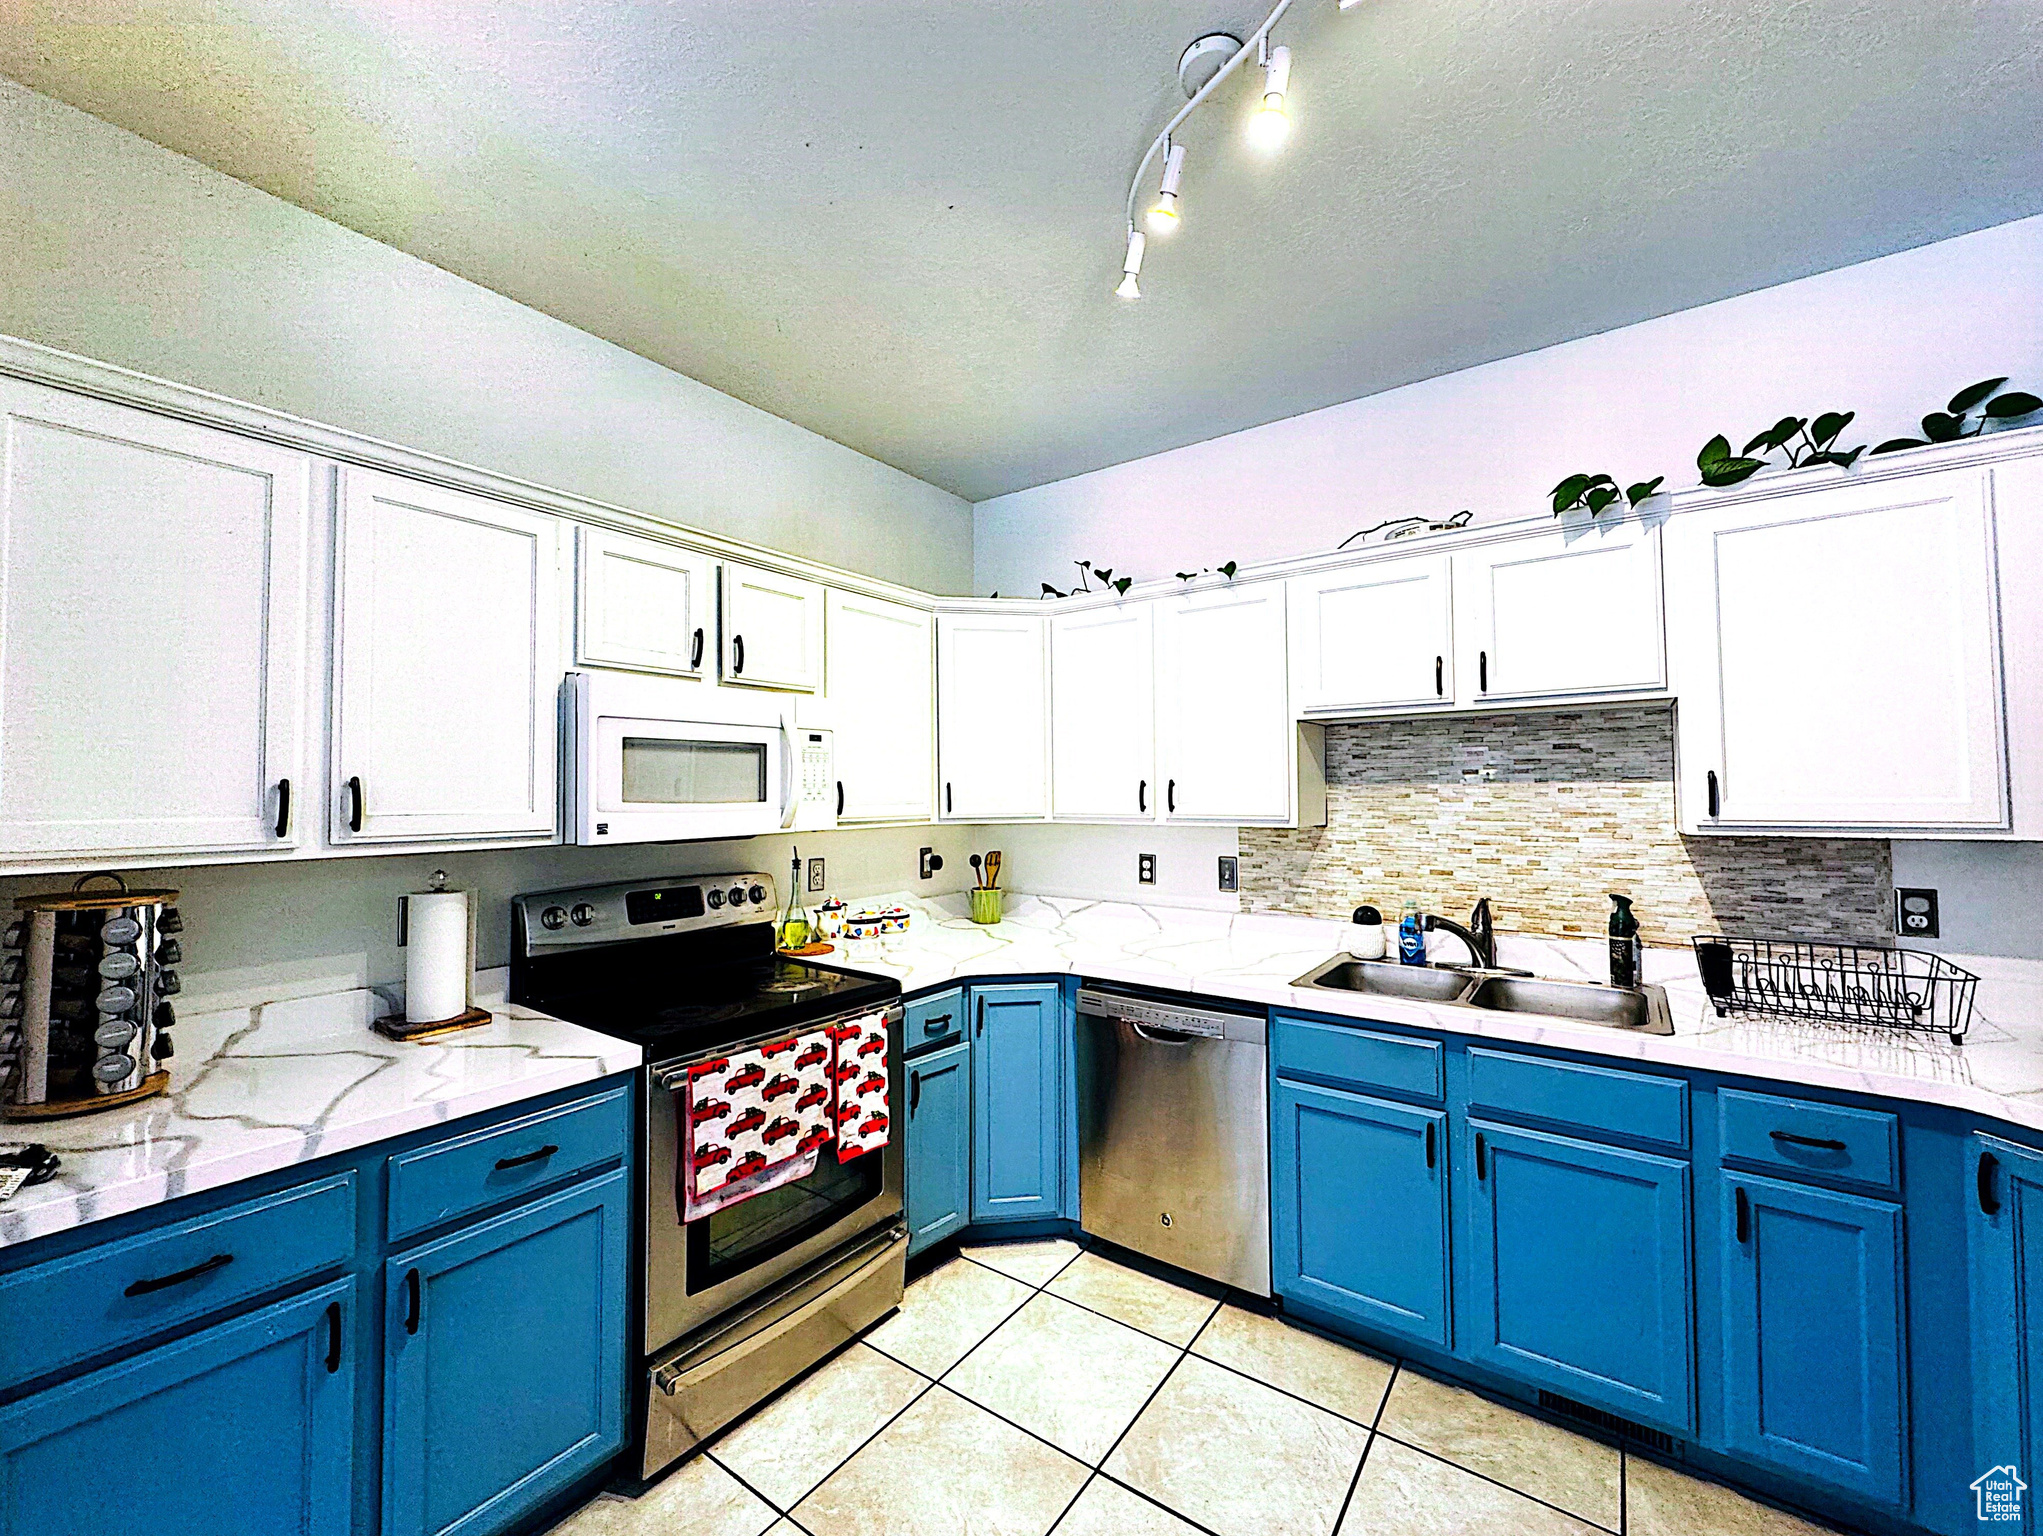 Kitchen featuring appliances with stainless steel finishes, rail lighting, light tile floors, sink, and blue cabinetry